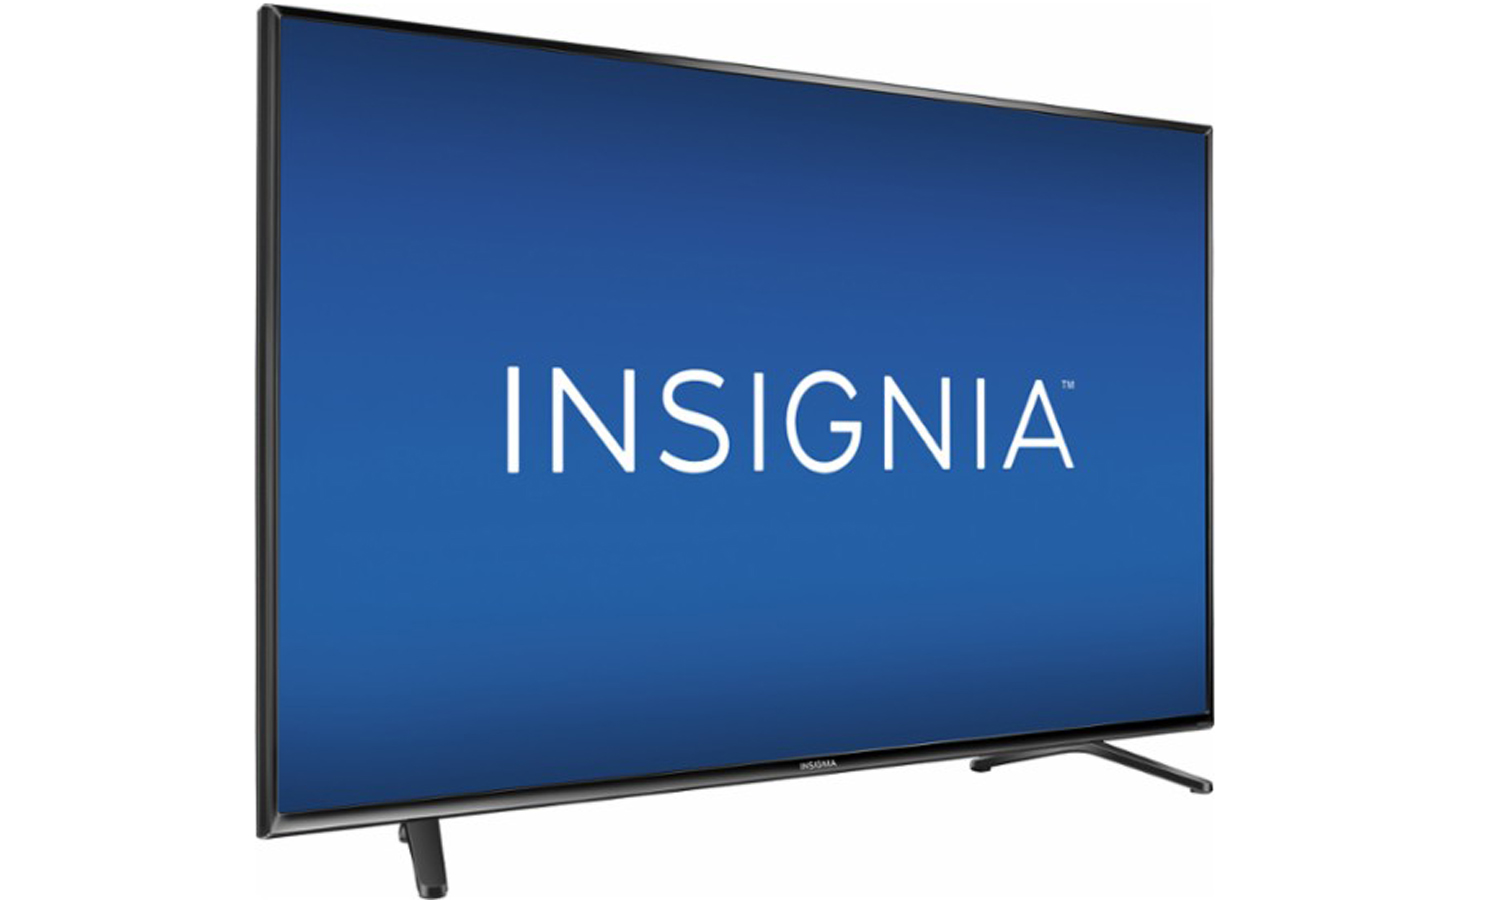 Insignia Ns 55d510na17 Hd Tv Review Big Screen Lacks Definition Tom S Guide